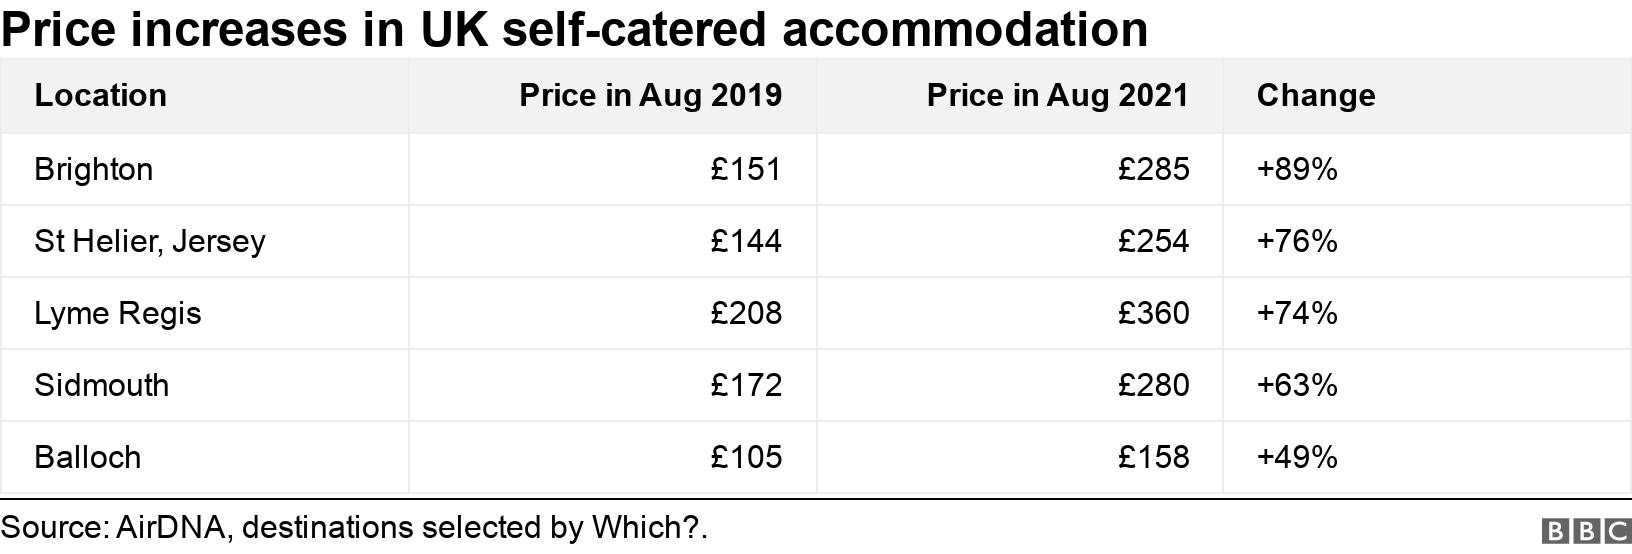 Price increases in UK self-catered accommodation. . .